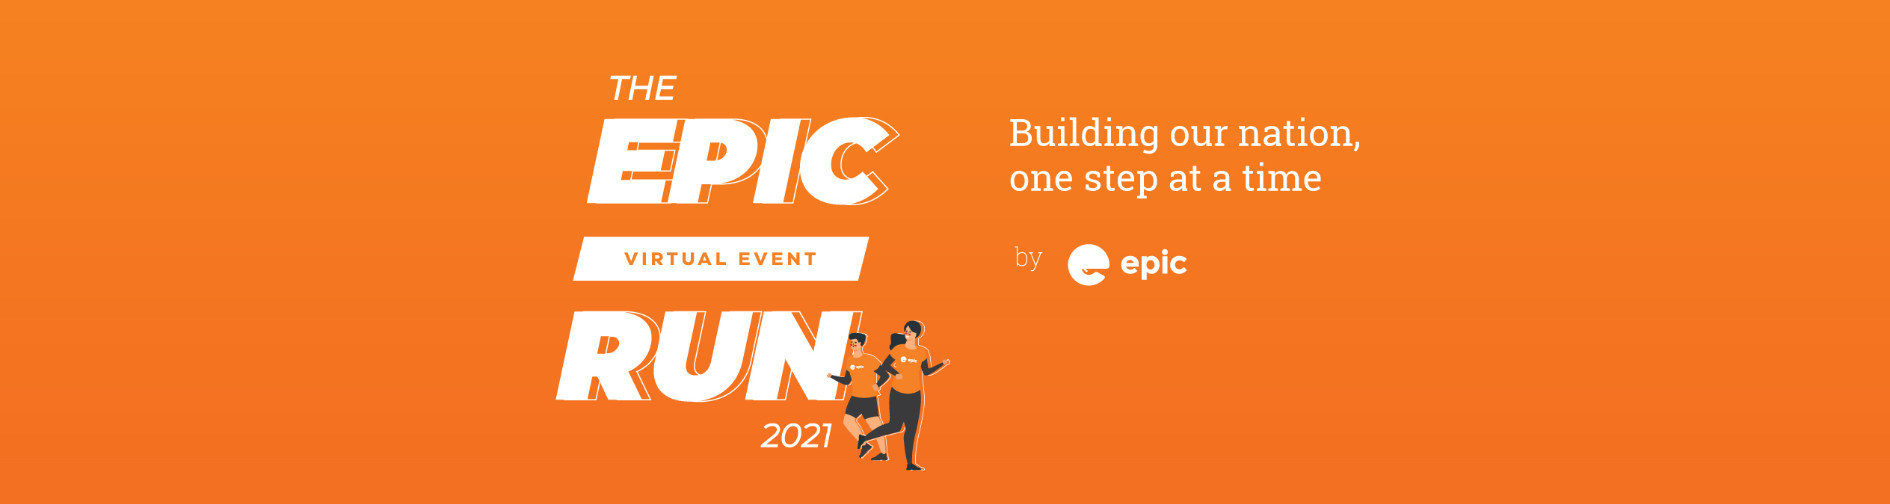 Running 6 challenges to raise fund for Epic